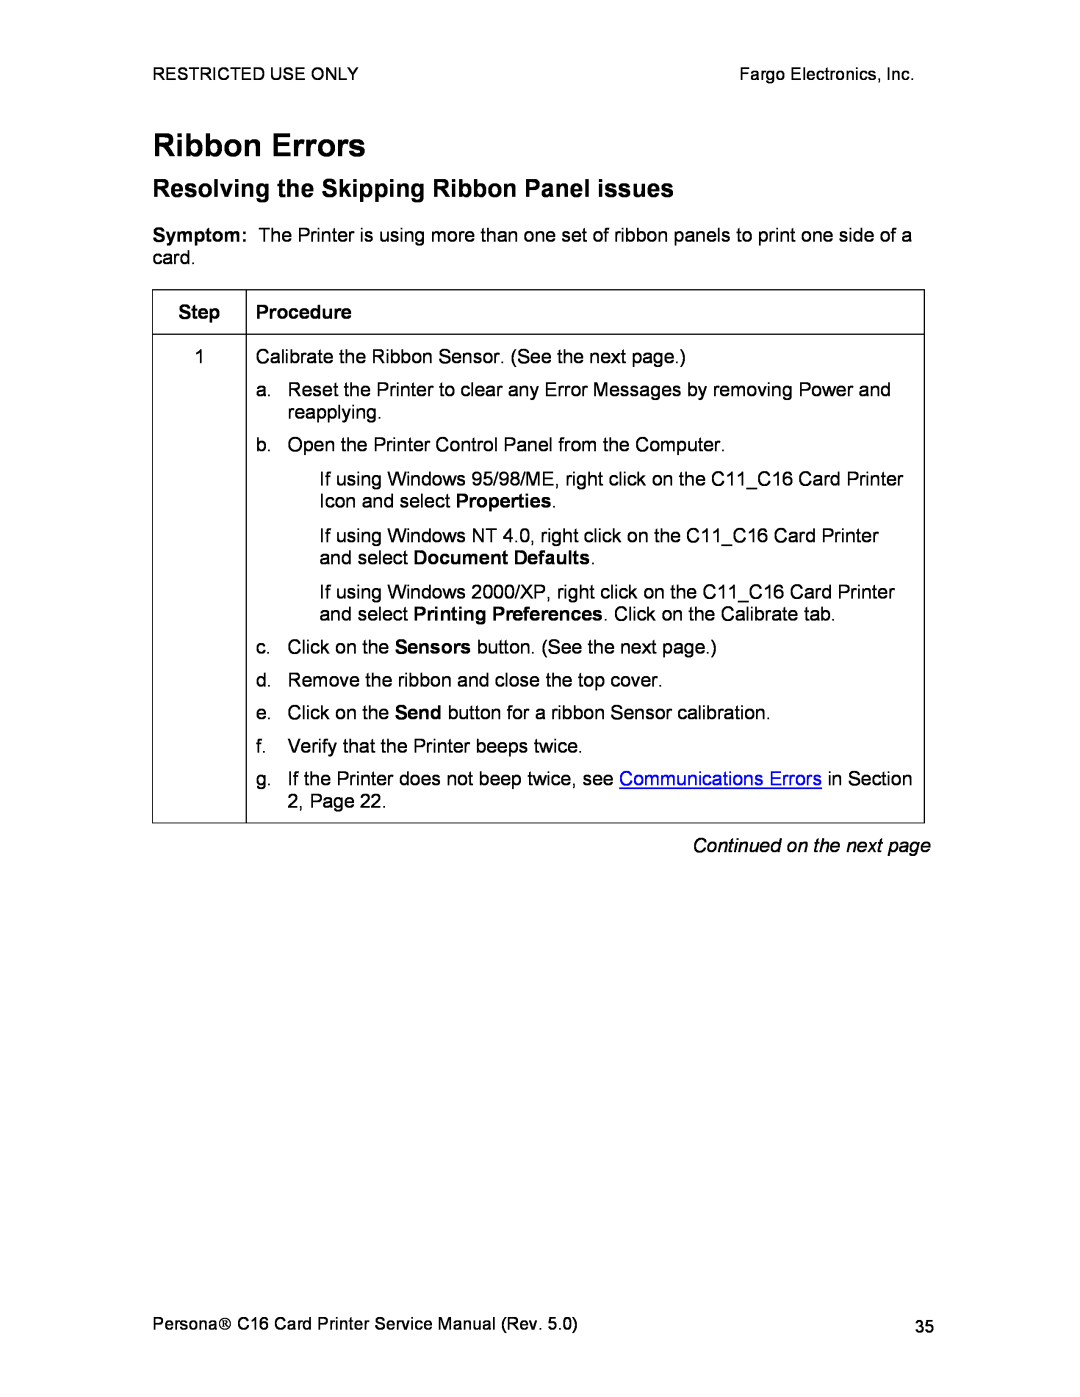 FARGO electronic C16 service manual Ribbon Errors, Resolving the Skipping Ribbon Panel issues, Continued on the next page 